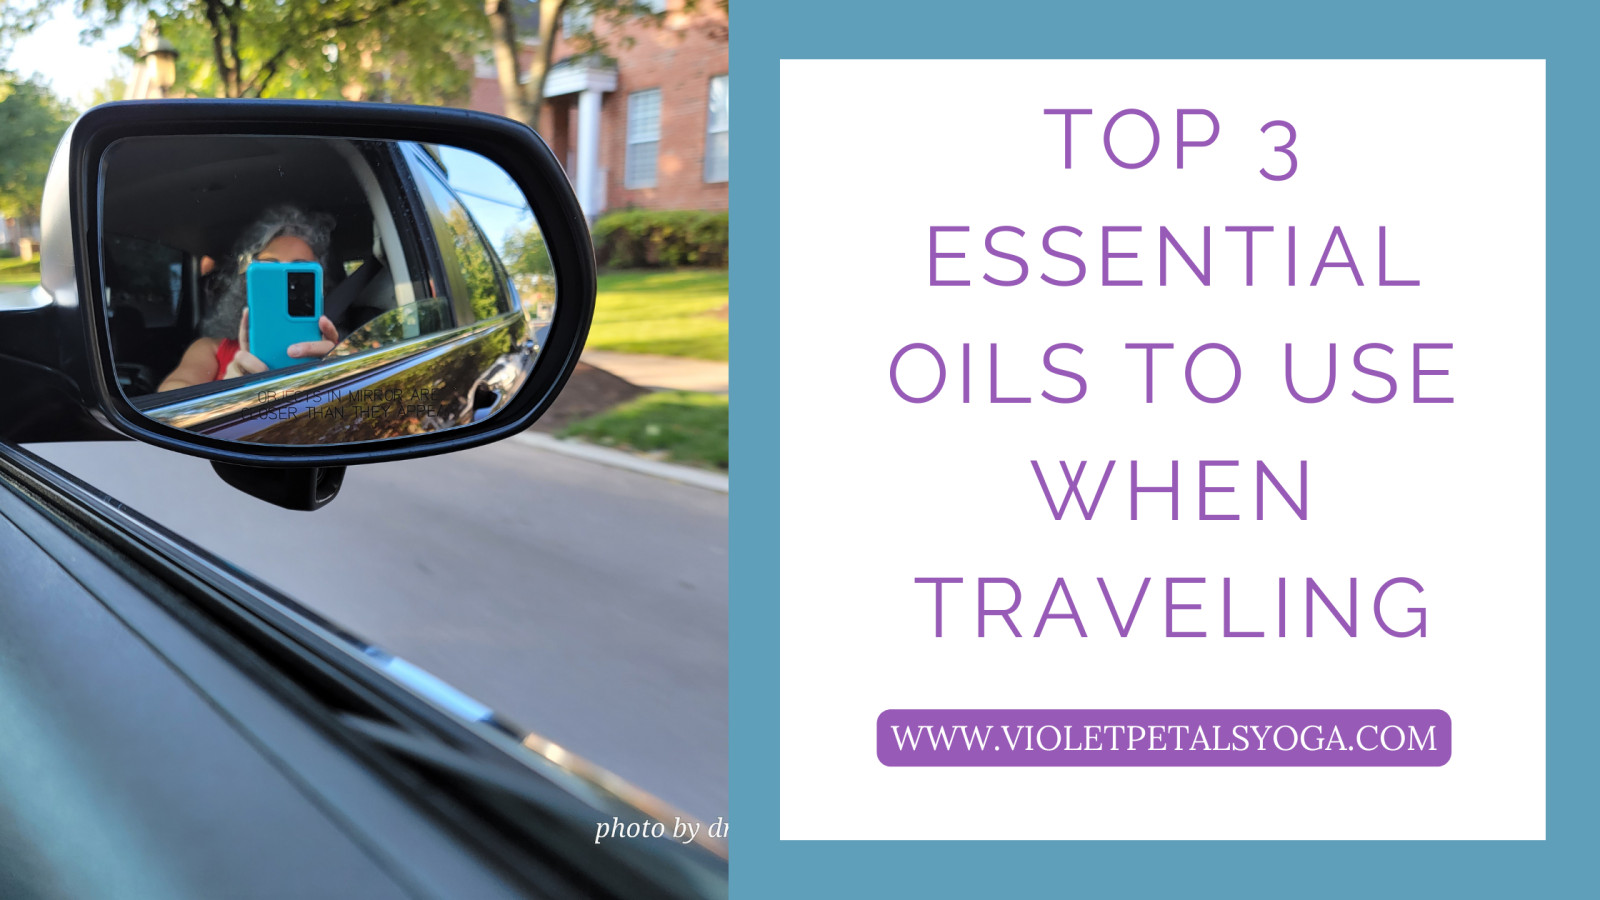 Top 3 Essential Oils to use when traveling